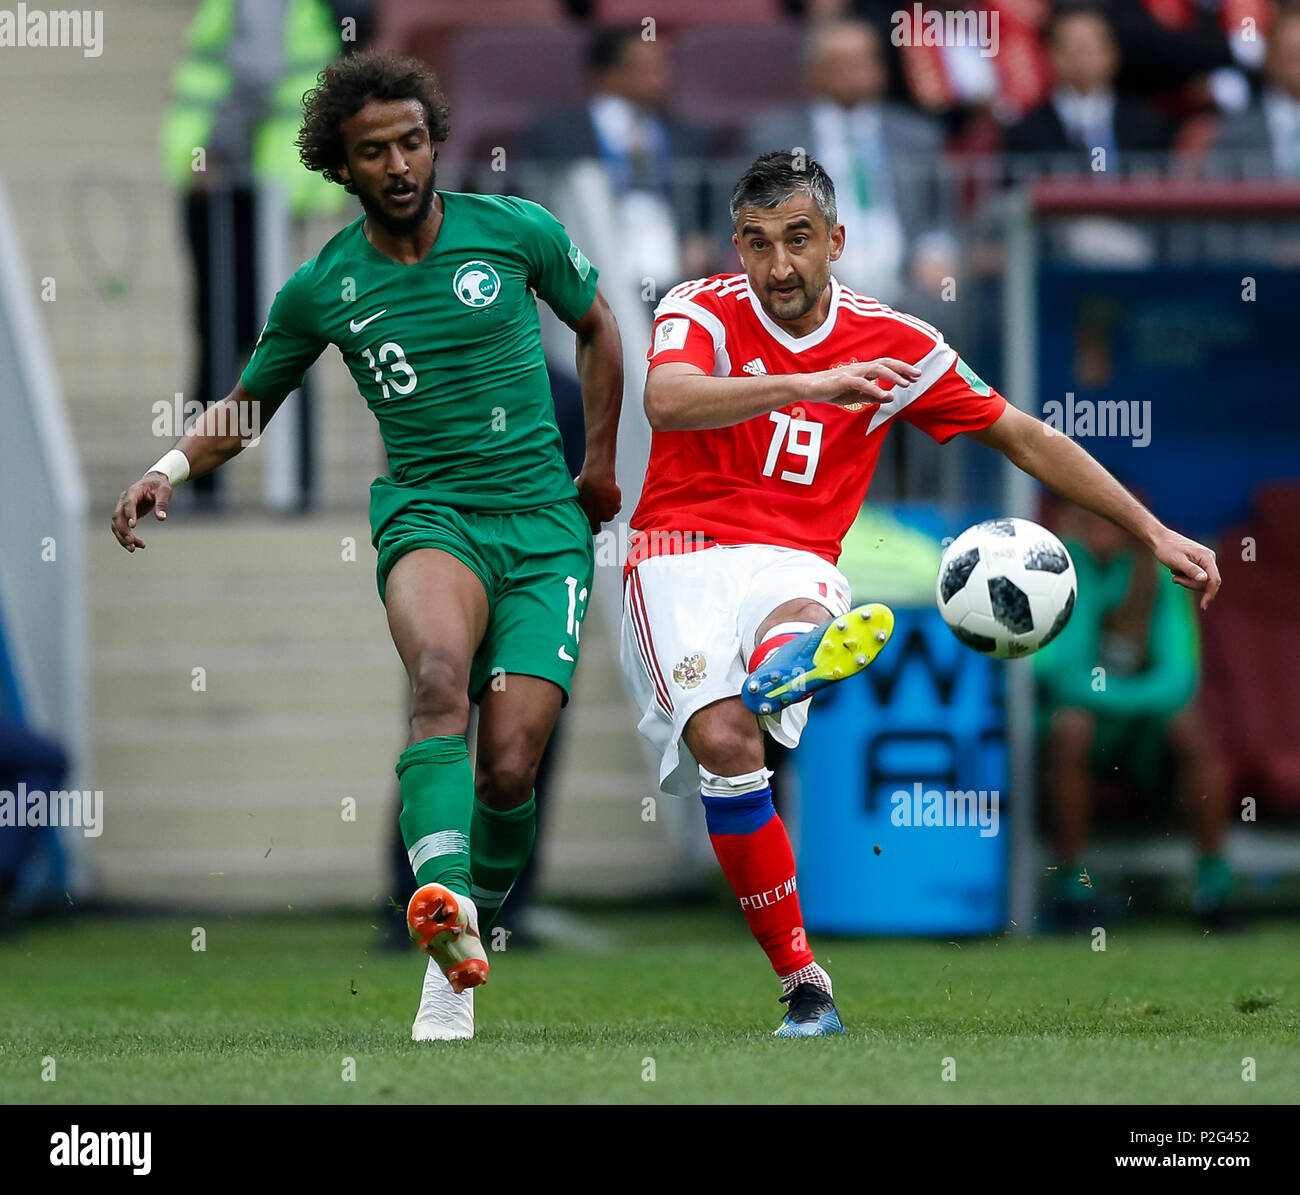 Moscow, Russia. 14th June 2018. Yasser Al-Shahrani of Saudi Arabia and Aleksandr Samedov of Russia during the 2018 FIFA World Cup Group A match between Russia and Saudi Arabia at Luzhniki Stadium on June 14th 2018 in Moscow, Russia. Credit: PHC Images/Alamy Live News Stock Photo